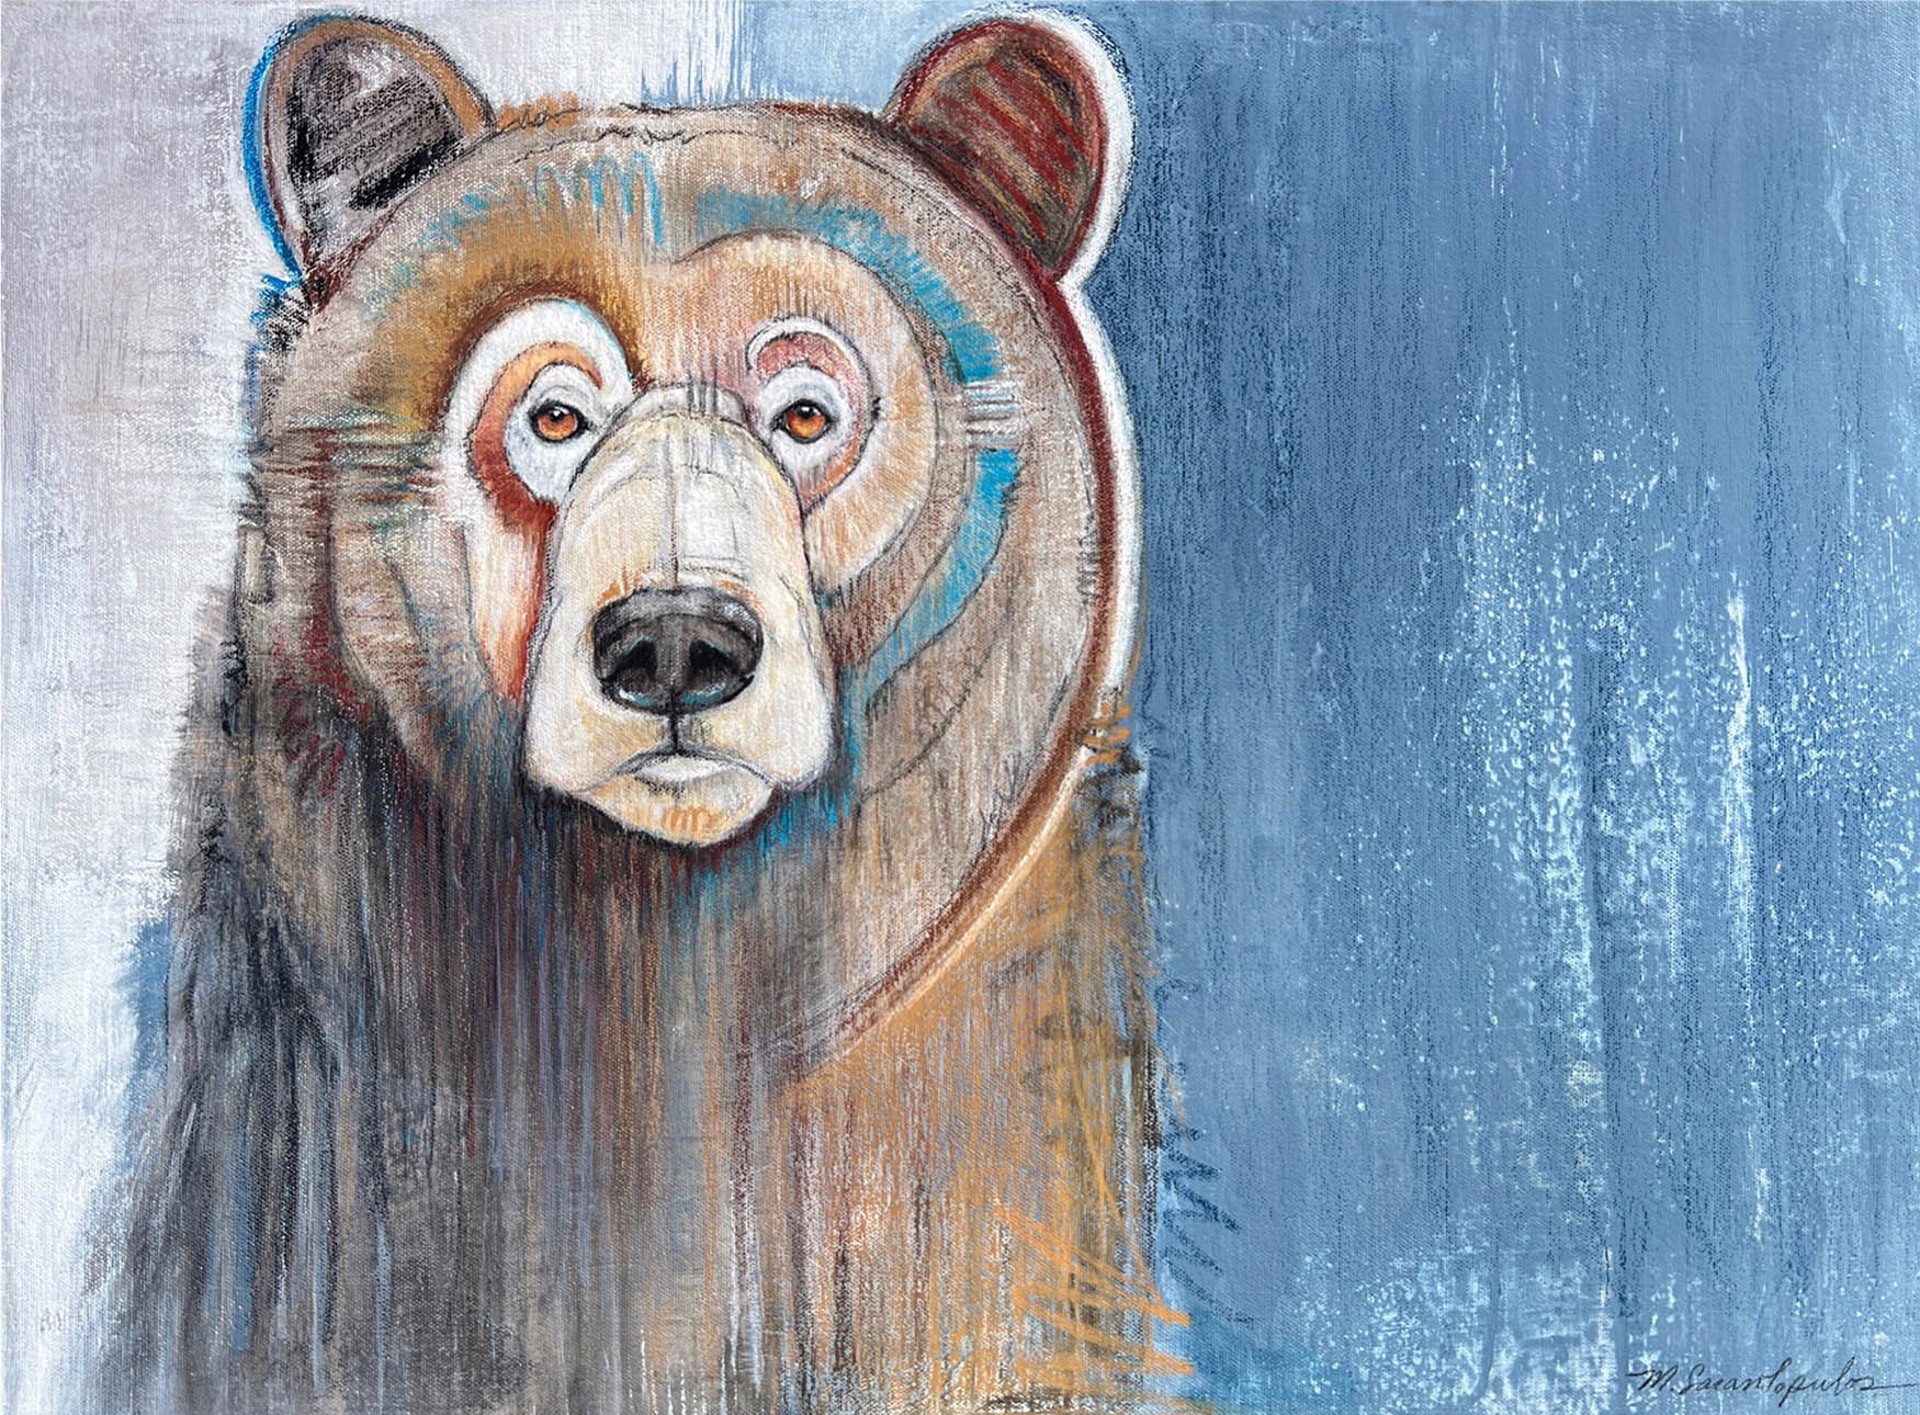 Original Mixed Media Artwork Featuring A Grizzly Bear Portrait Sketched On Top Of Abstract Blue Background